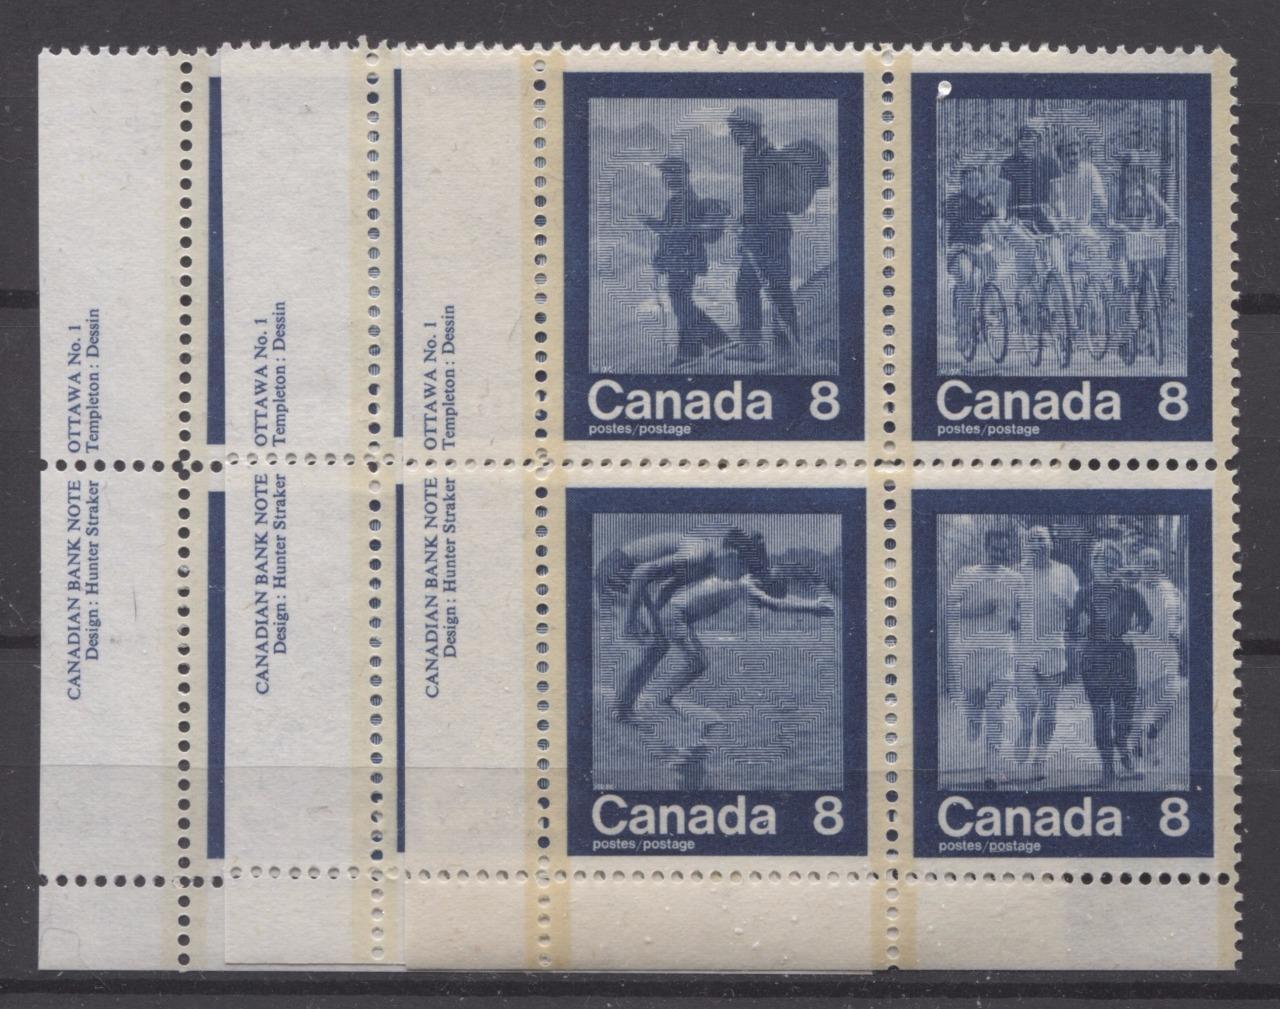 Canada #632a (SG#768a) 1974 Summer Sports Issue Block of 4 Paper/Tag Type 6 Plate 1 UL VF-80 NH Brixton Chrome 